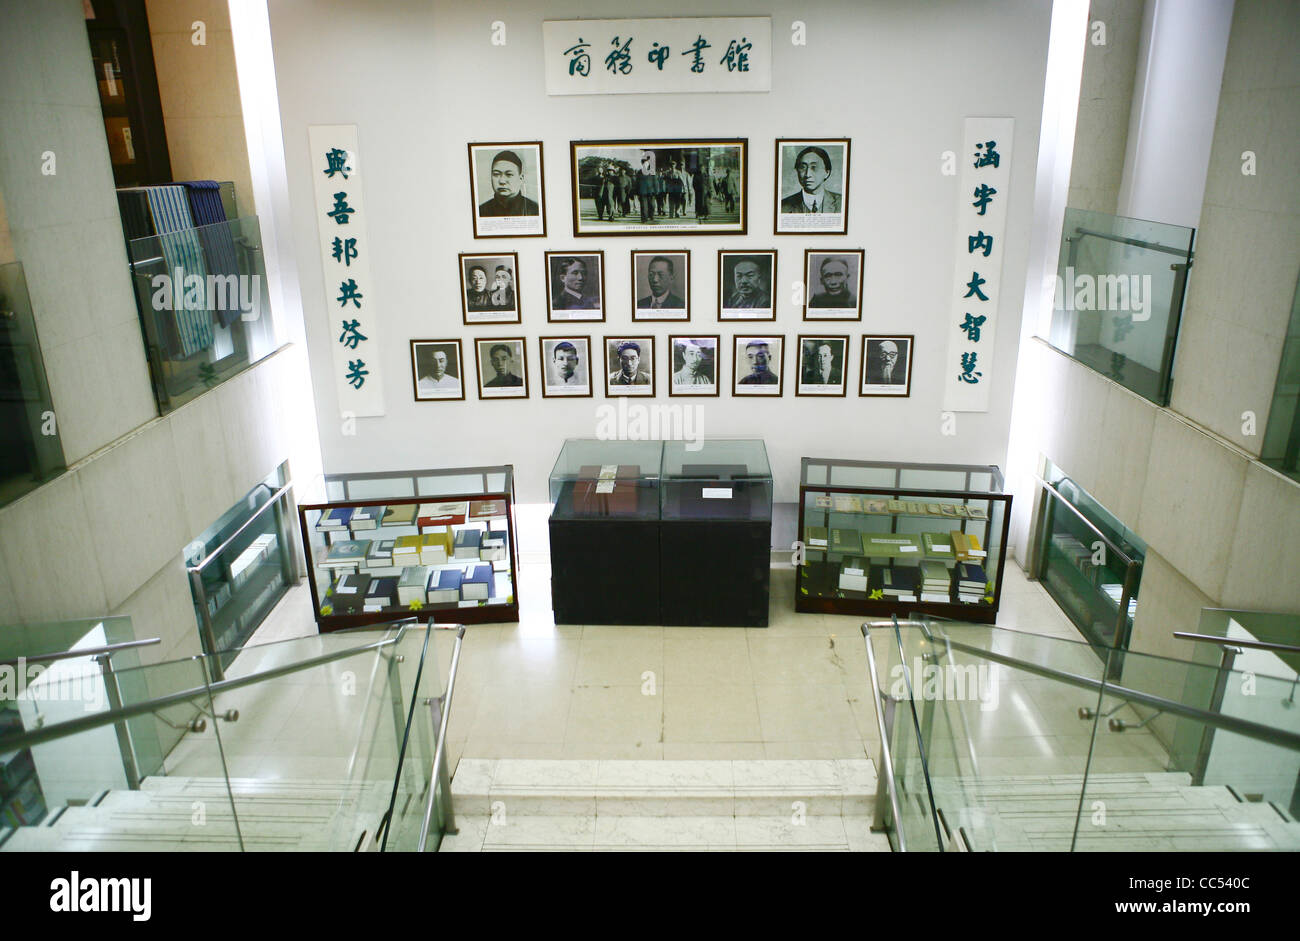 Old publications and famous person's photos displayed in The Commercial Press, Beijing, China Stock Photo